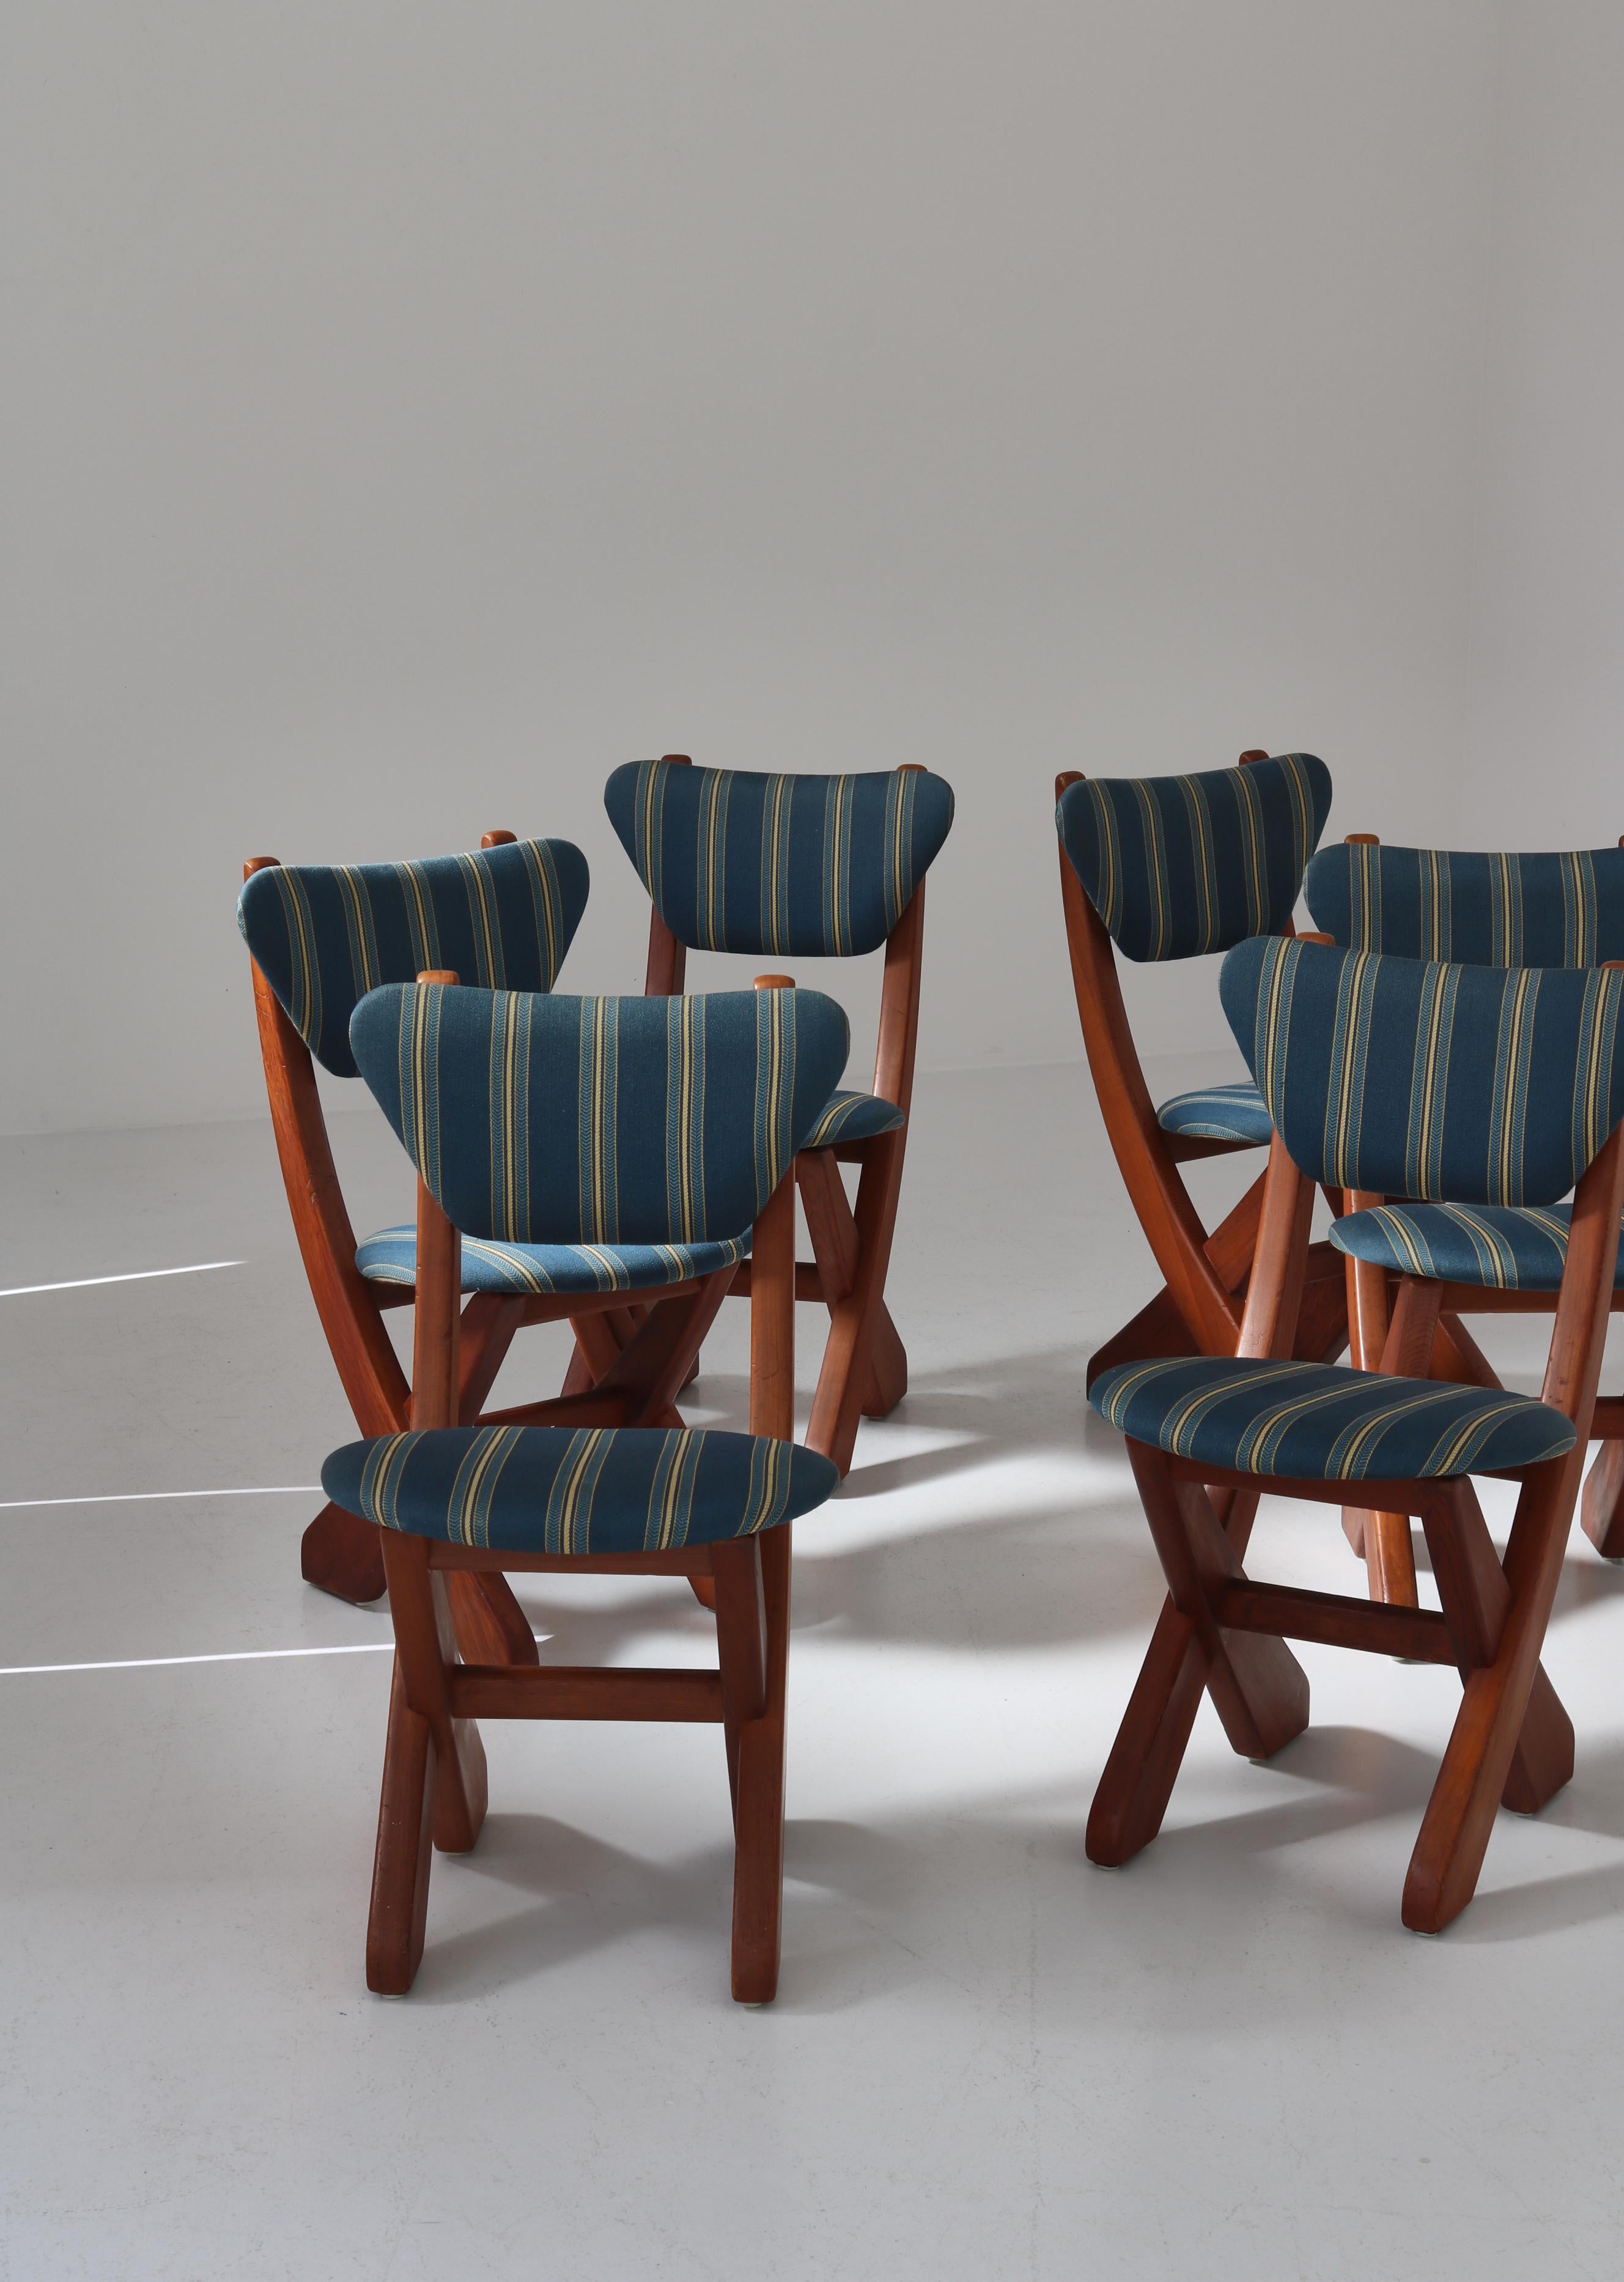 Set of 6 Scandinavian Modern Pinewood Dining Chairs, Denmark, 1960s In Good Condition For Sale In Odense, DK